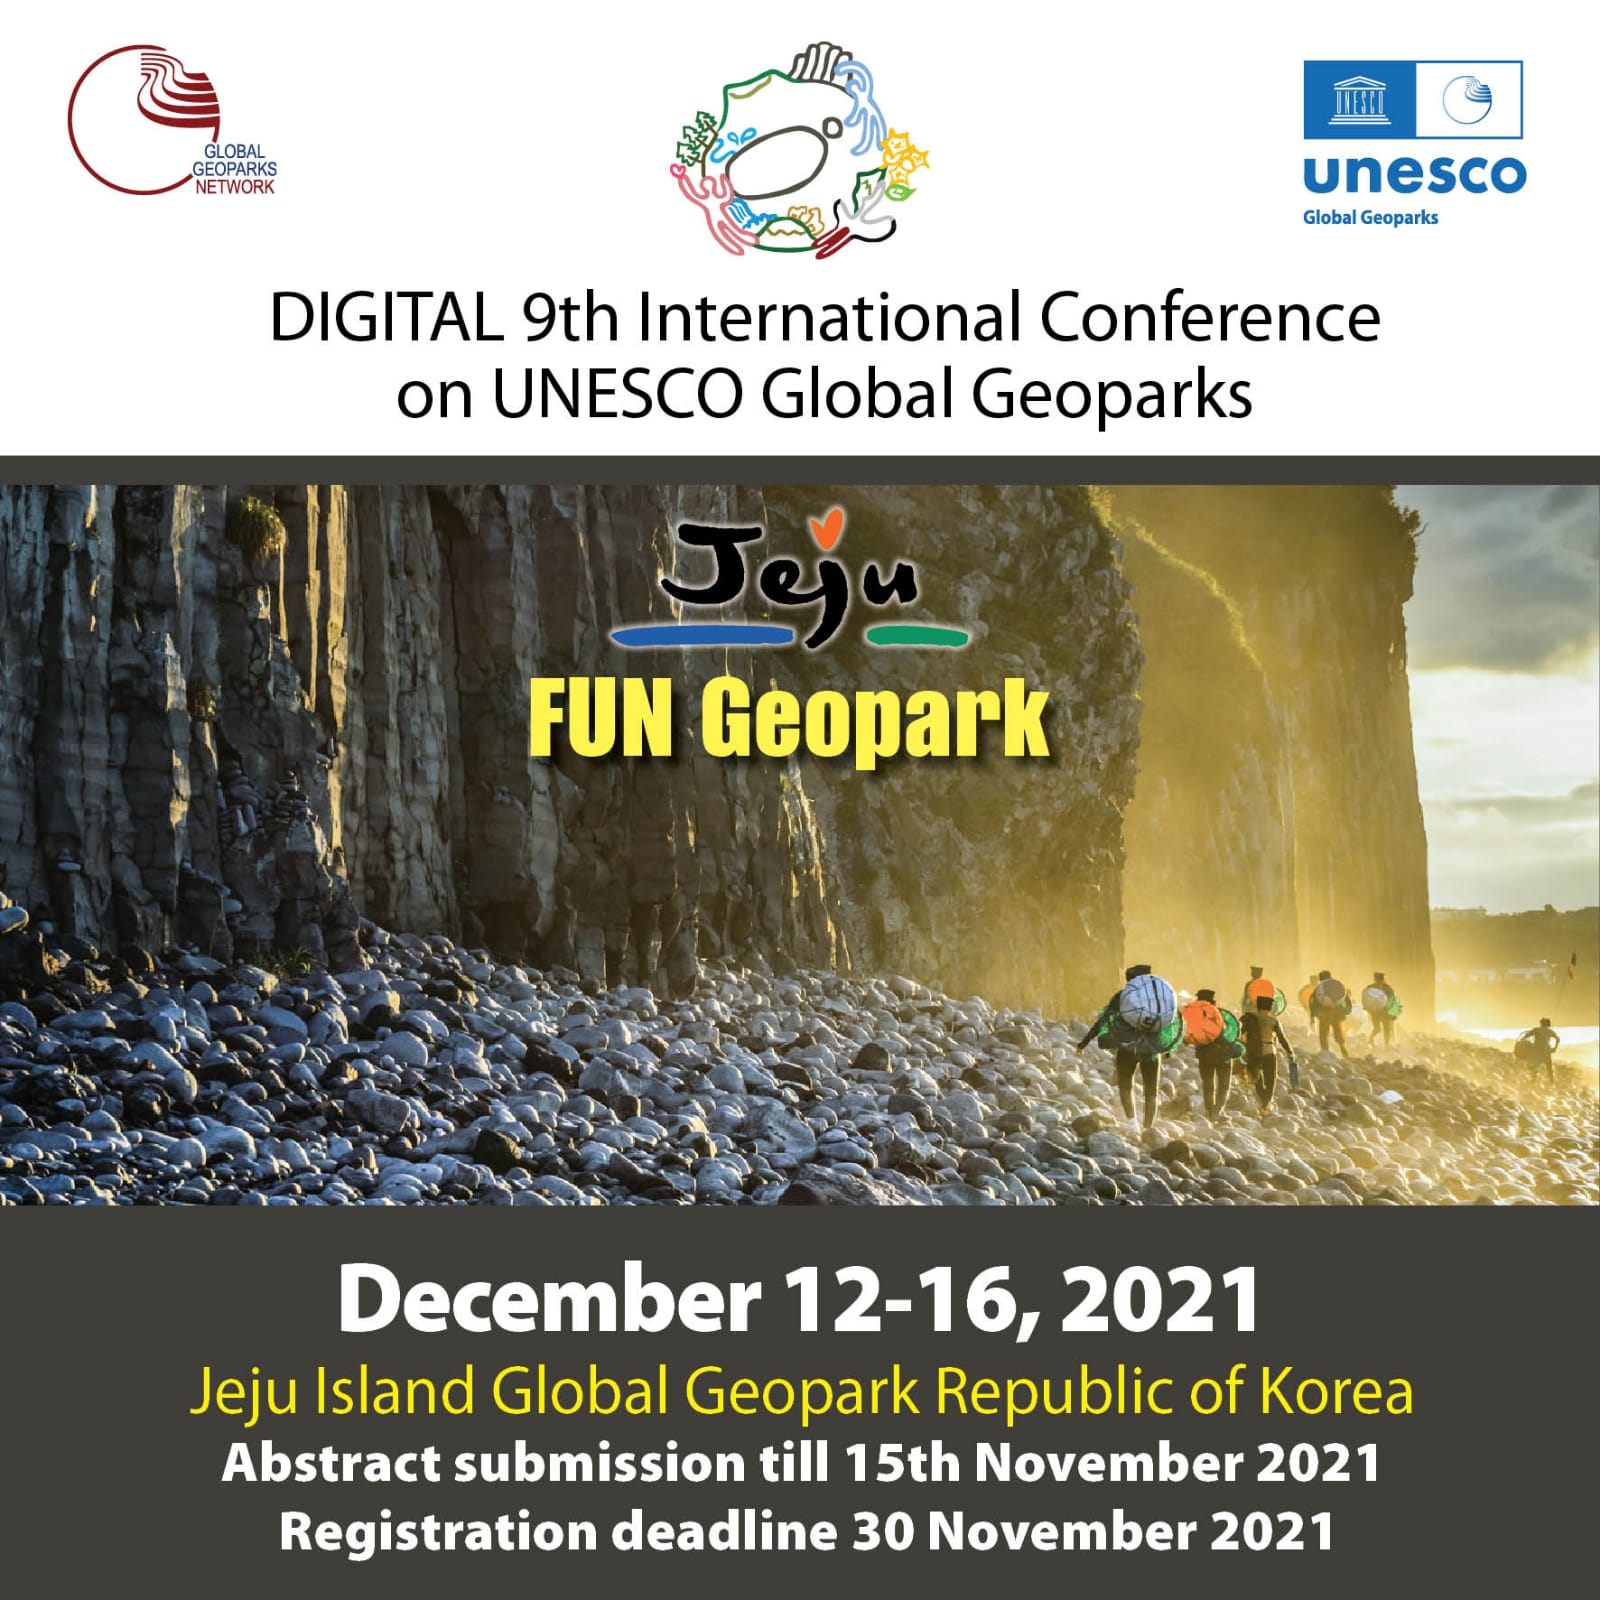 Digital 9th International Conference on UNESCO Global Geoparks